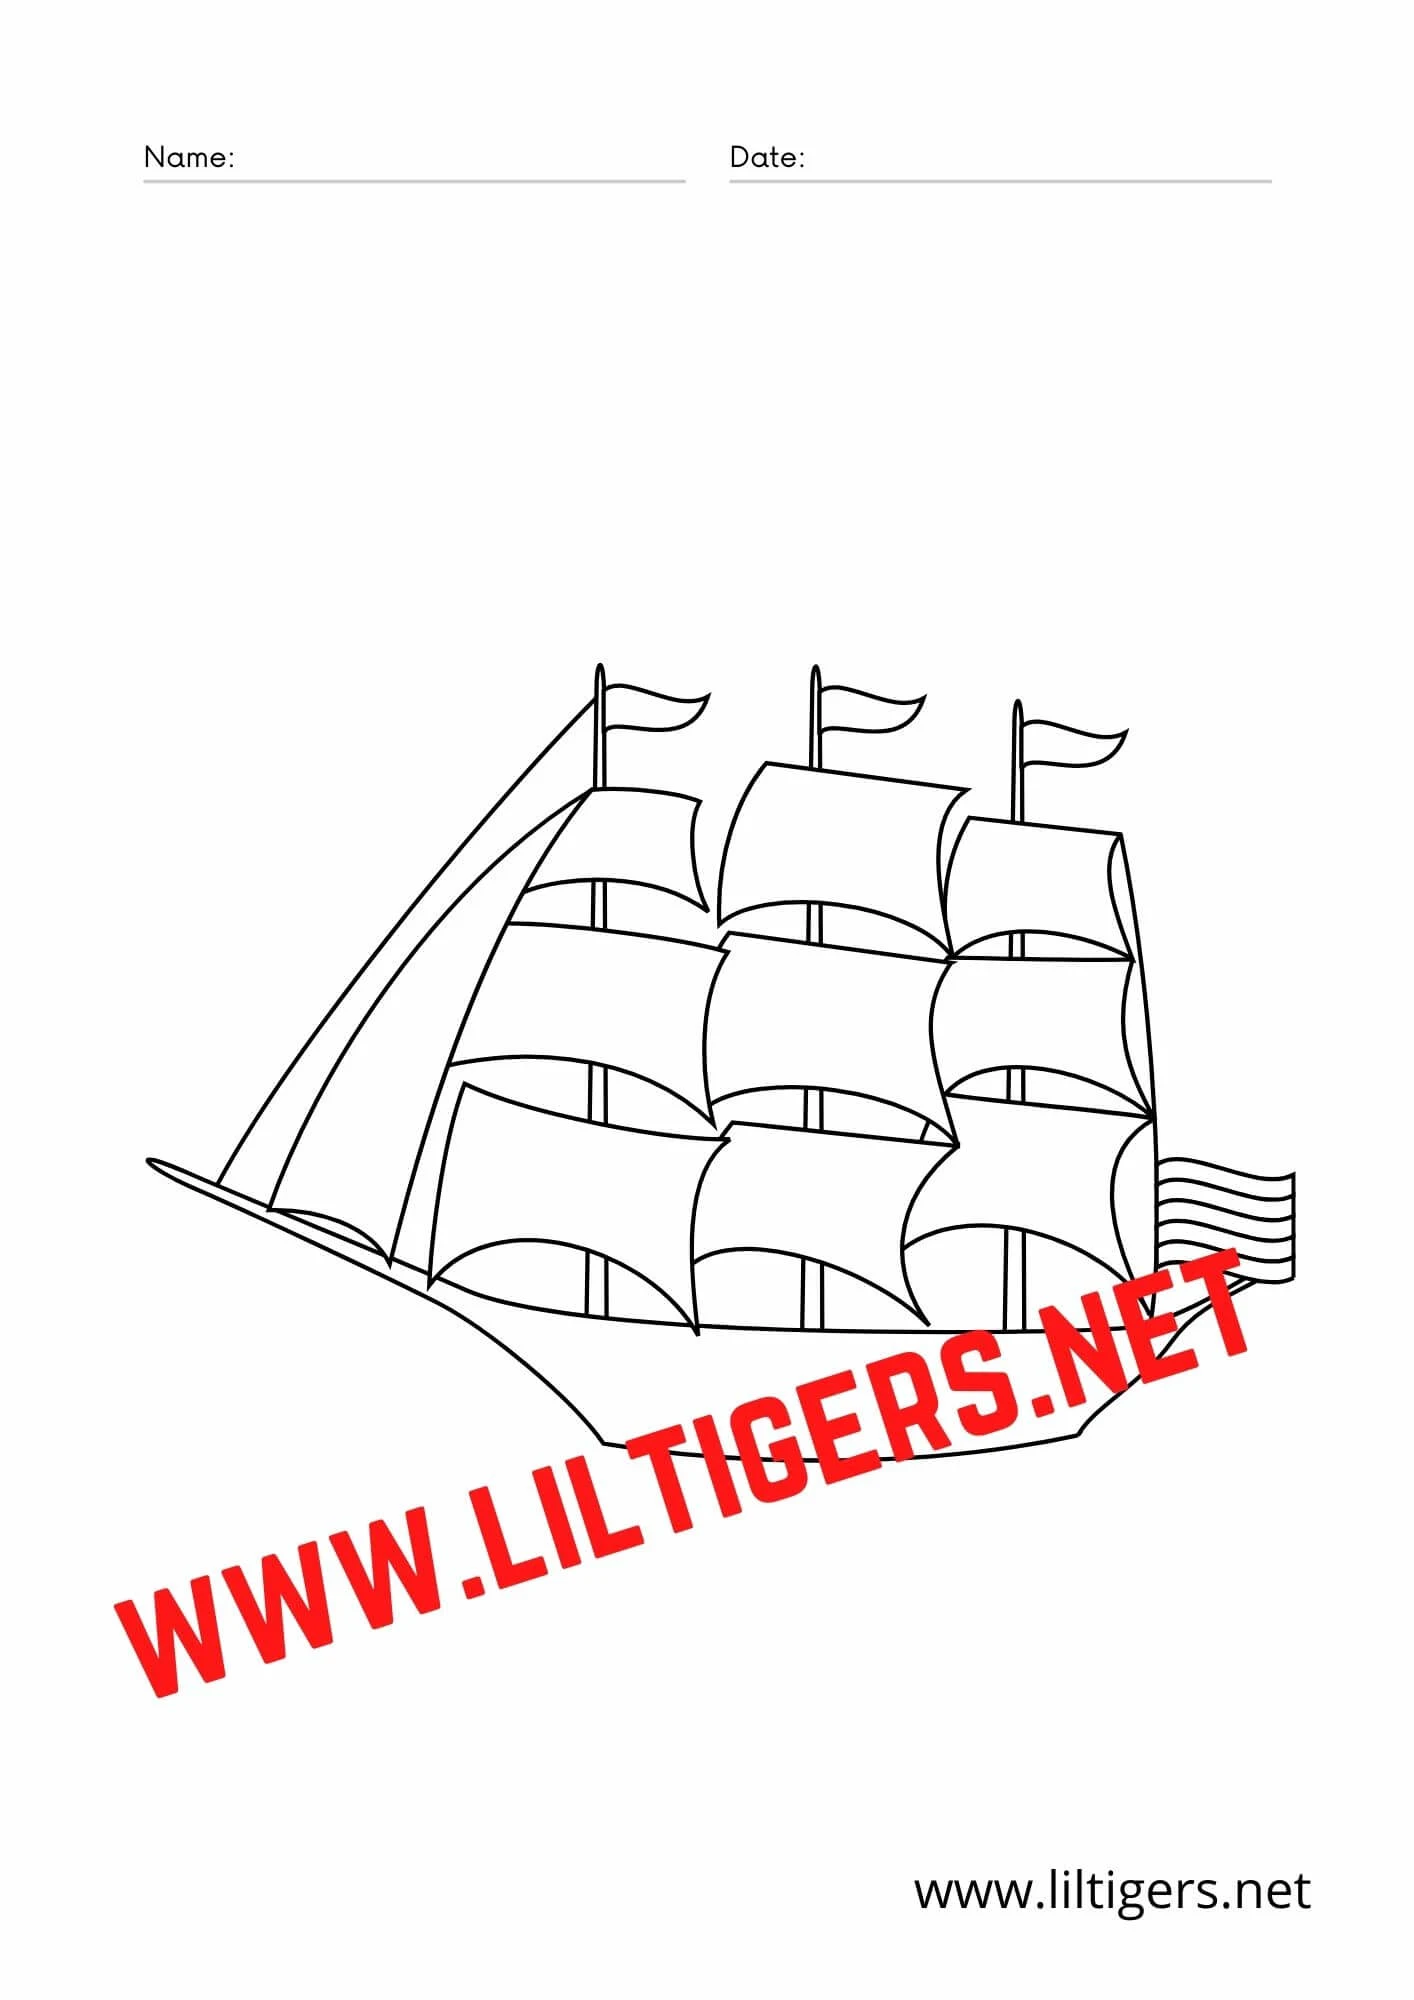 Pirate ship coloring pages free